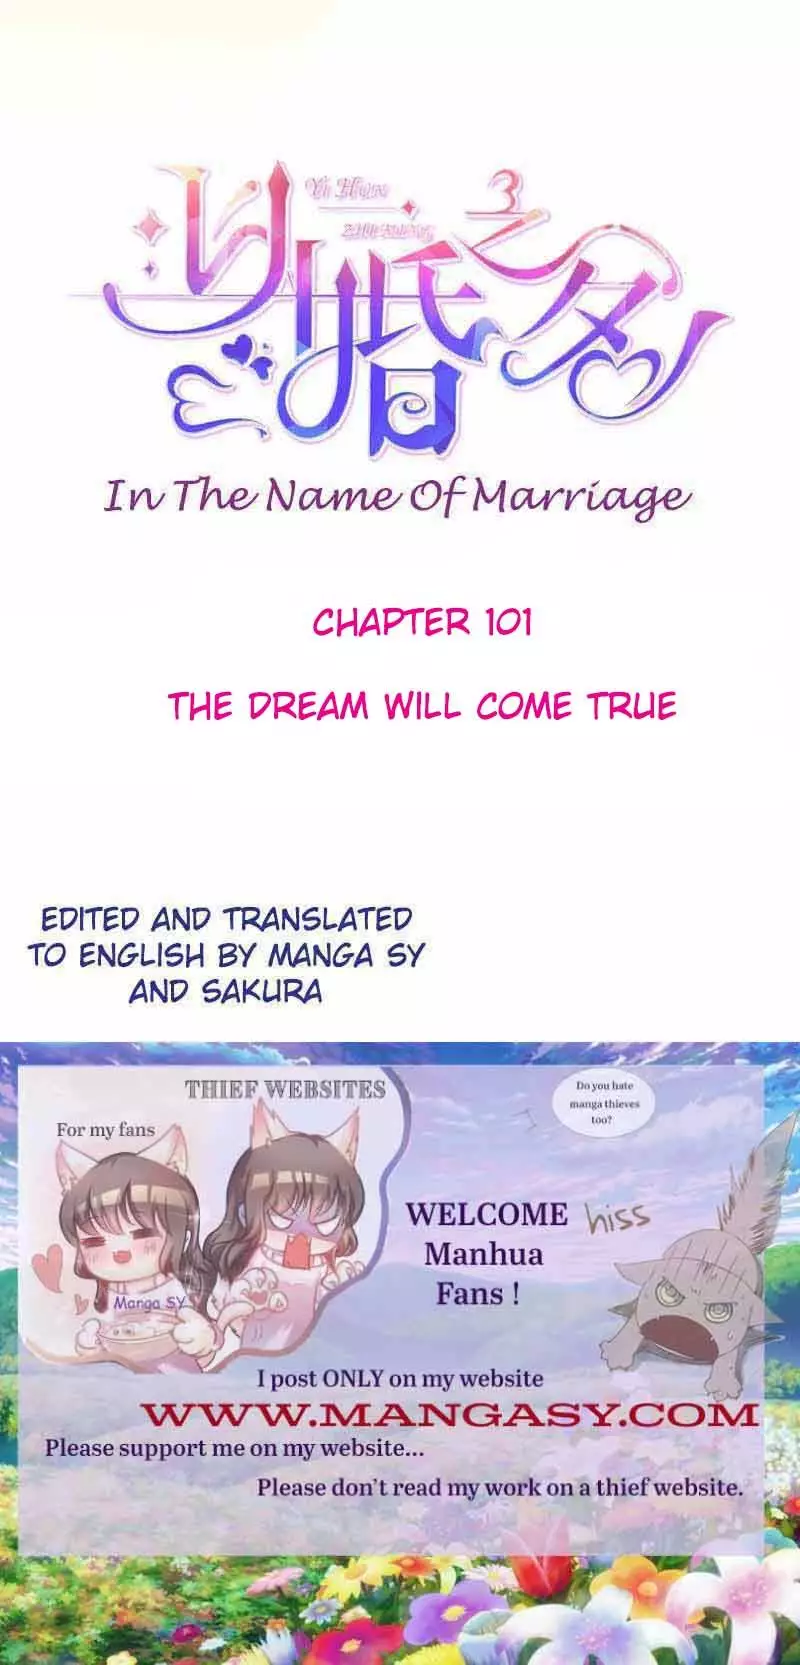 In The Name Of Marriage - 101 page 1-76acf545